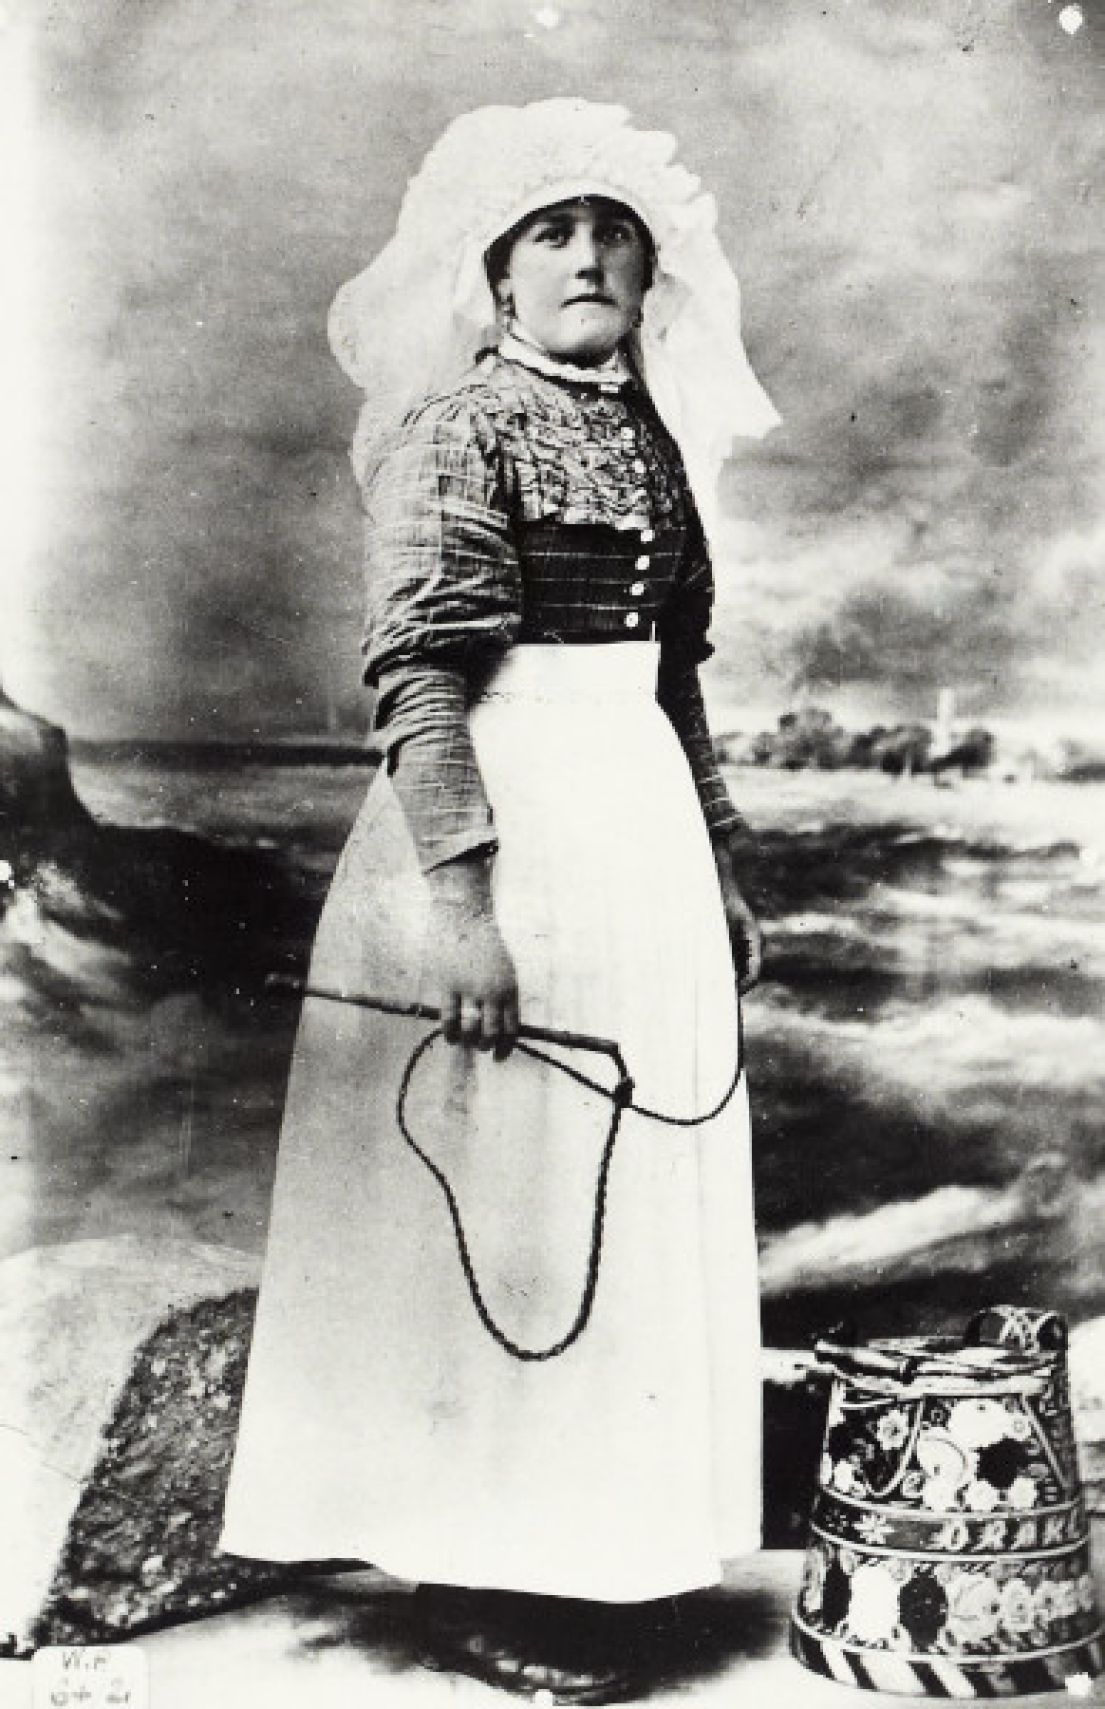 Old photograph of a woman in a balloon sleeved dress with a white apron and a lace headdress. Stood by a painted metal bucket?